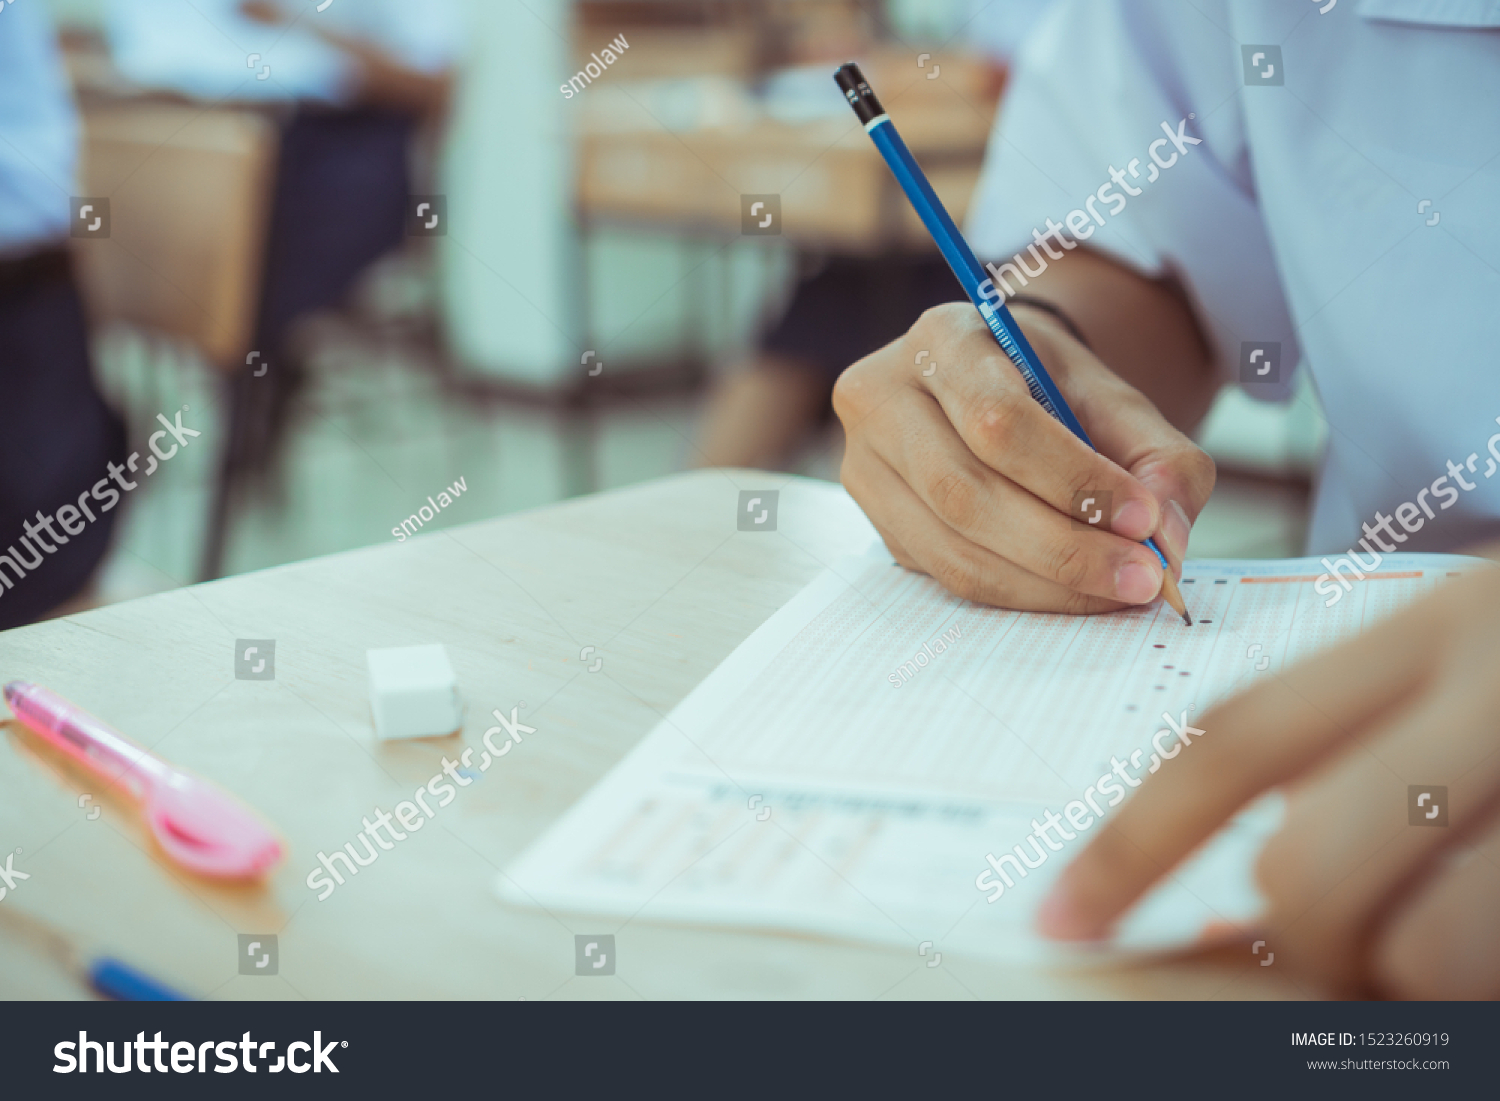 test exam for education in school concept : University student holding pencil notes paper on answer sheet at lecture chair for taking exams in examination classroom. Assessment learning in class ideas #1523260919